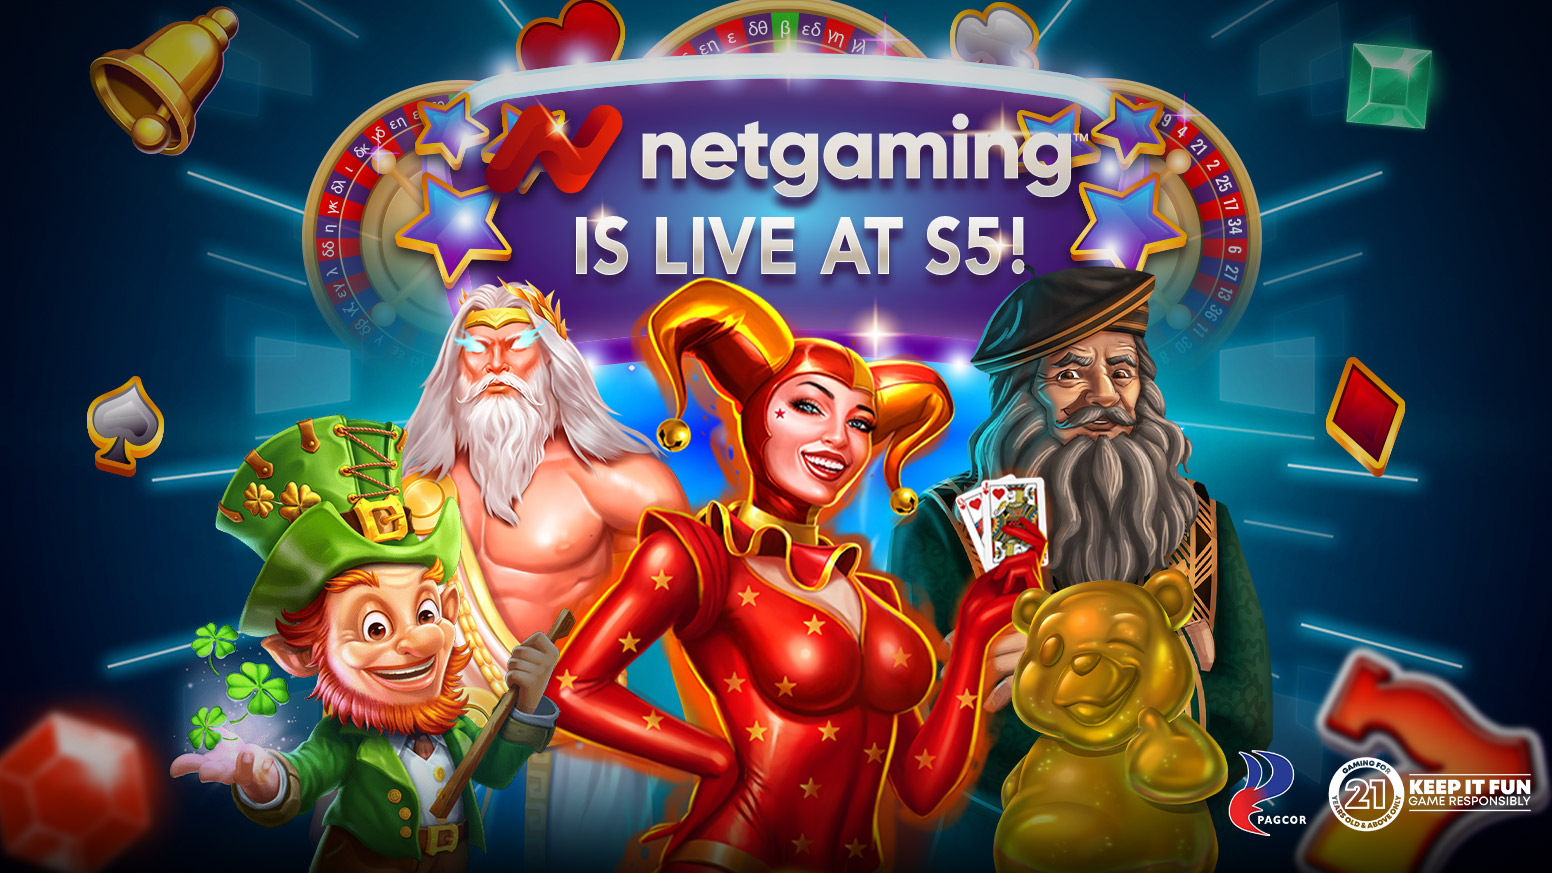 NetGaming is Live on S5